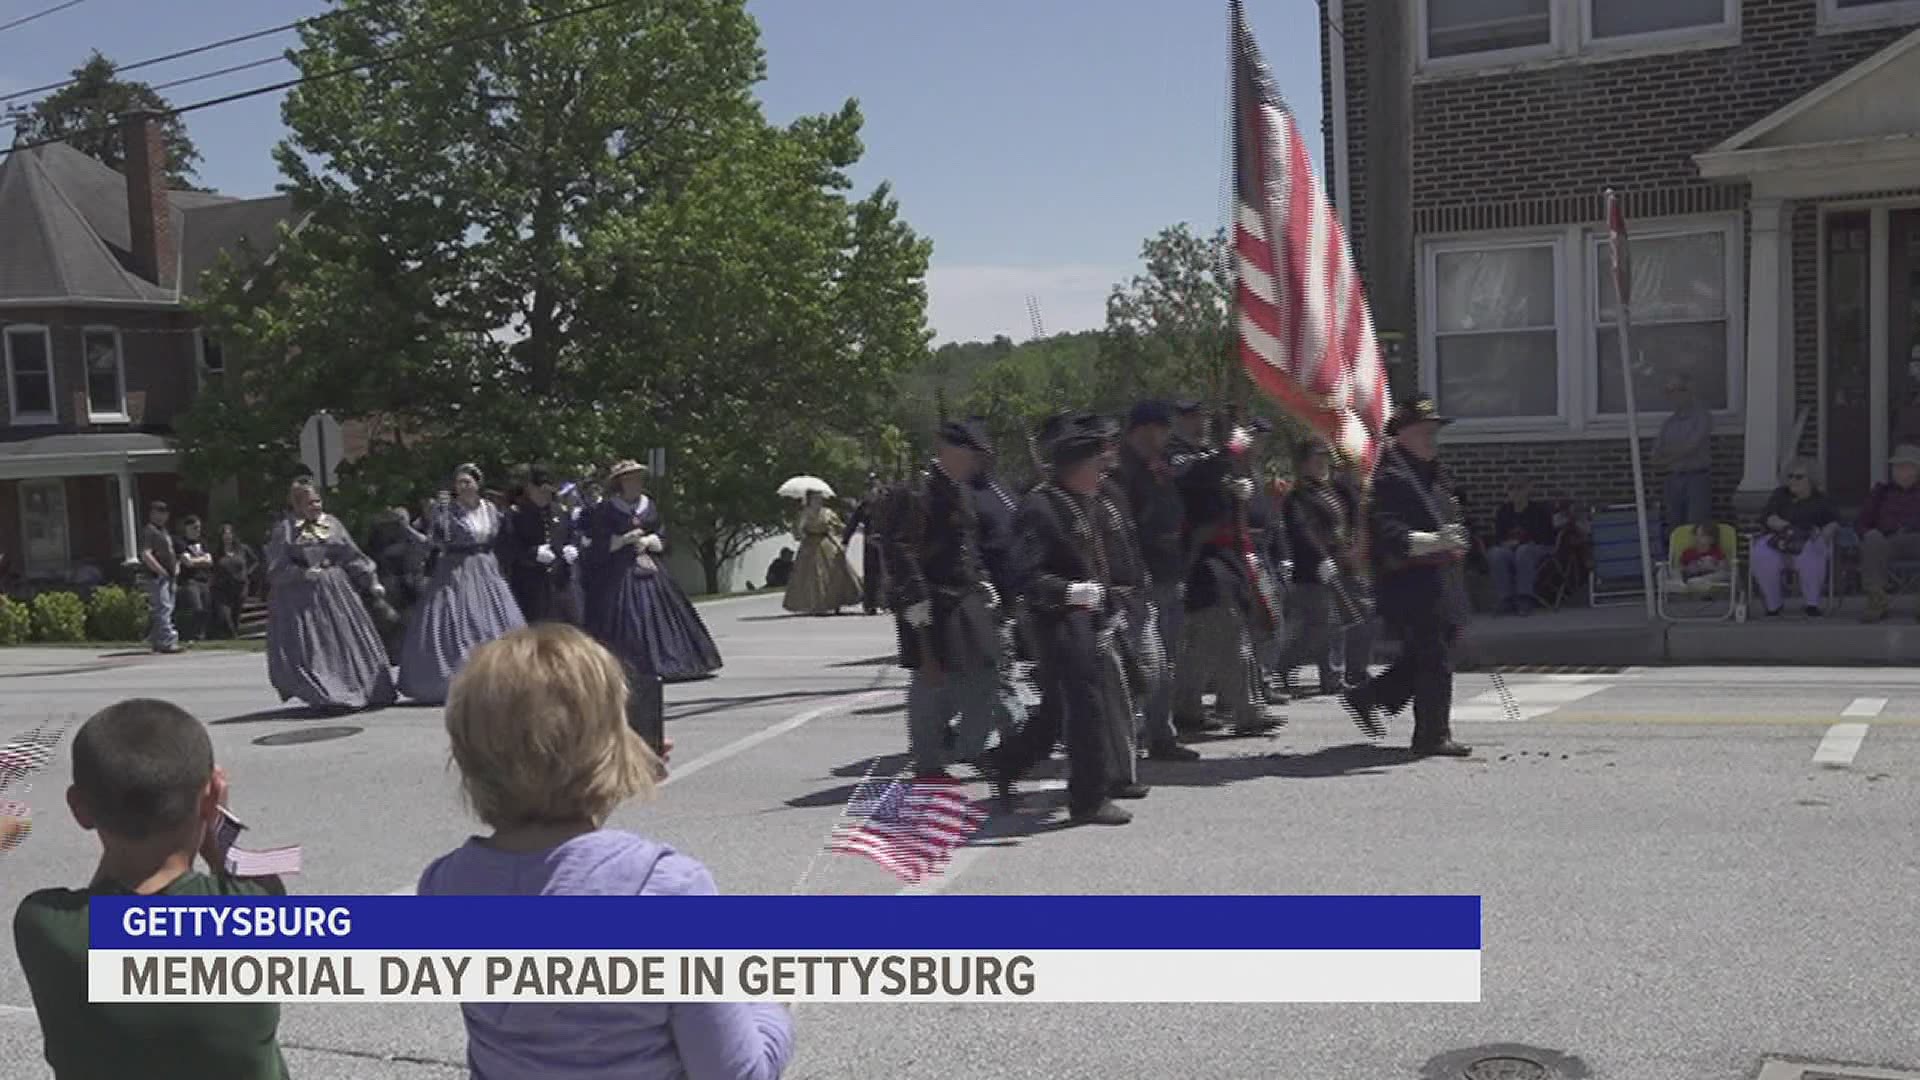 Hundreds of people gathered in Gettysburg to attend the Memorial Day parade and a ceremony at the Gettysburg National Cemetery